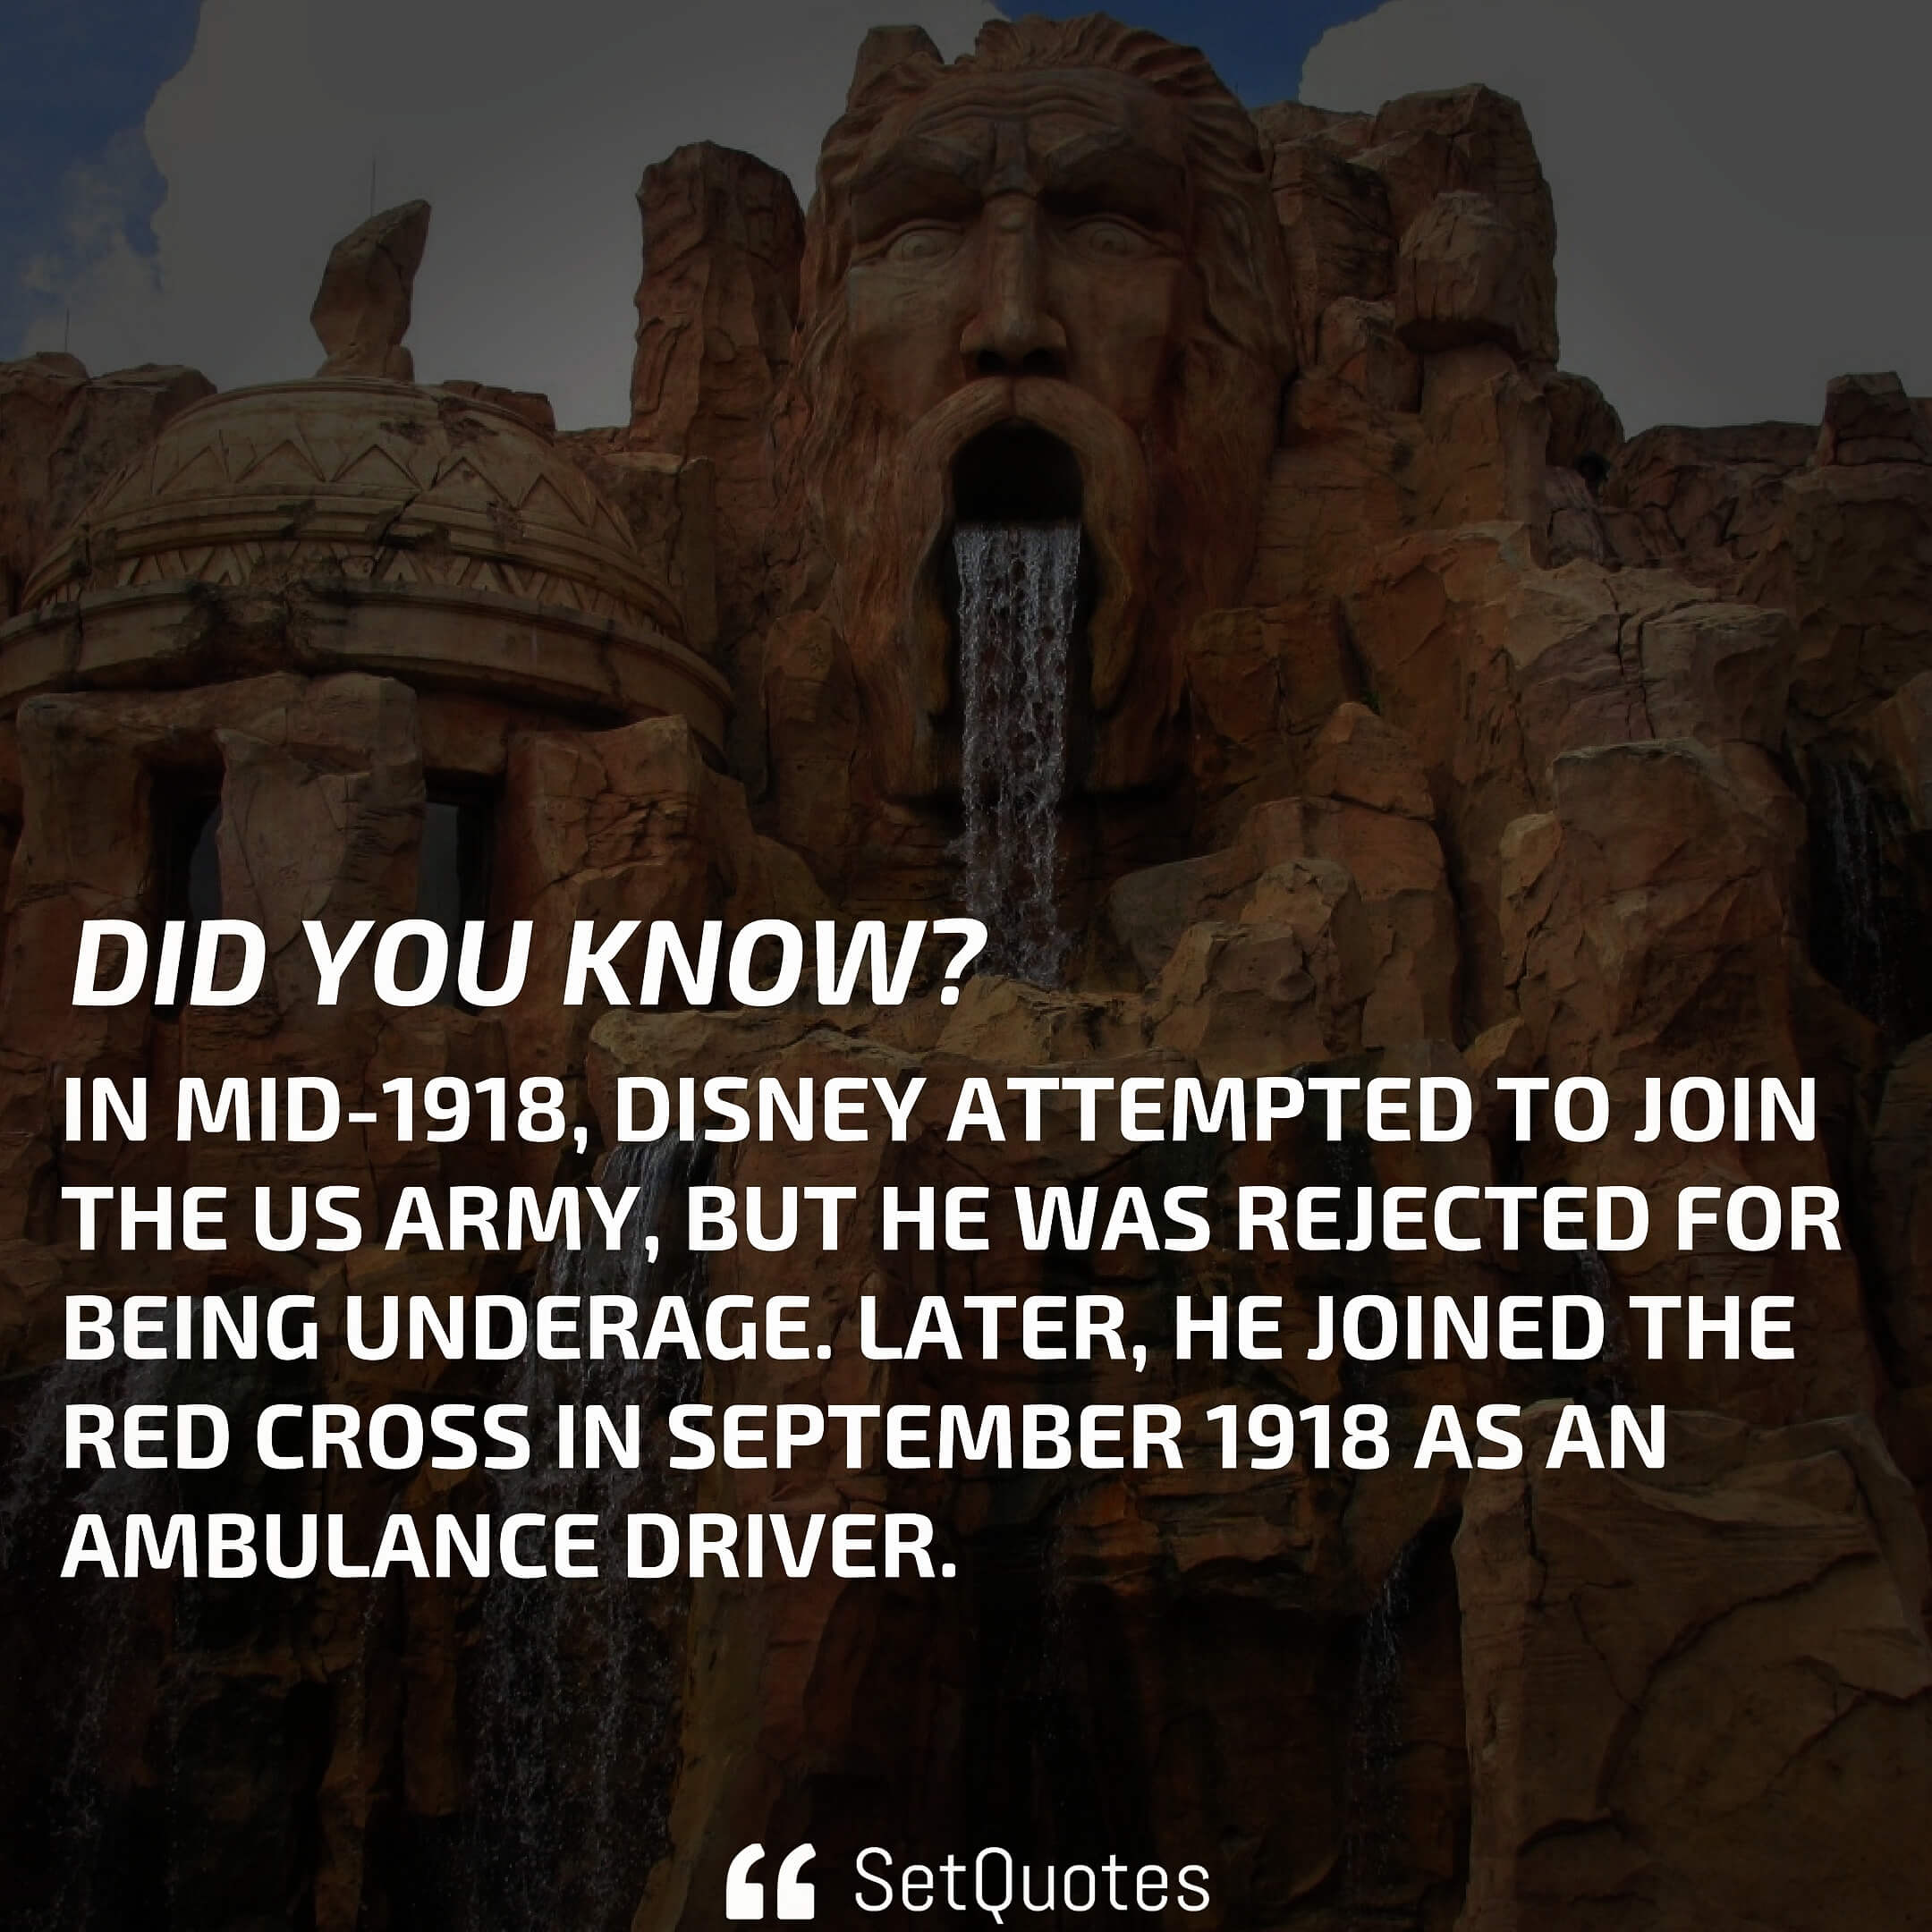 In mid-1918, disney attempted to join the us army, but he was rejected for being underage. Later, he joined the red cross in september 1918 as an ambulance driver.